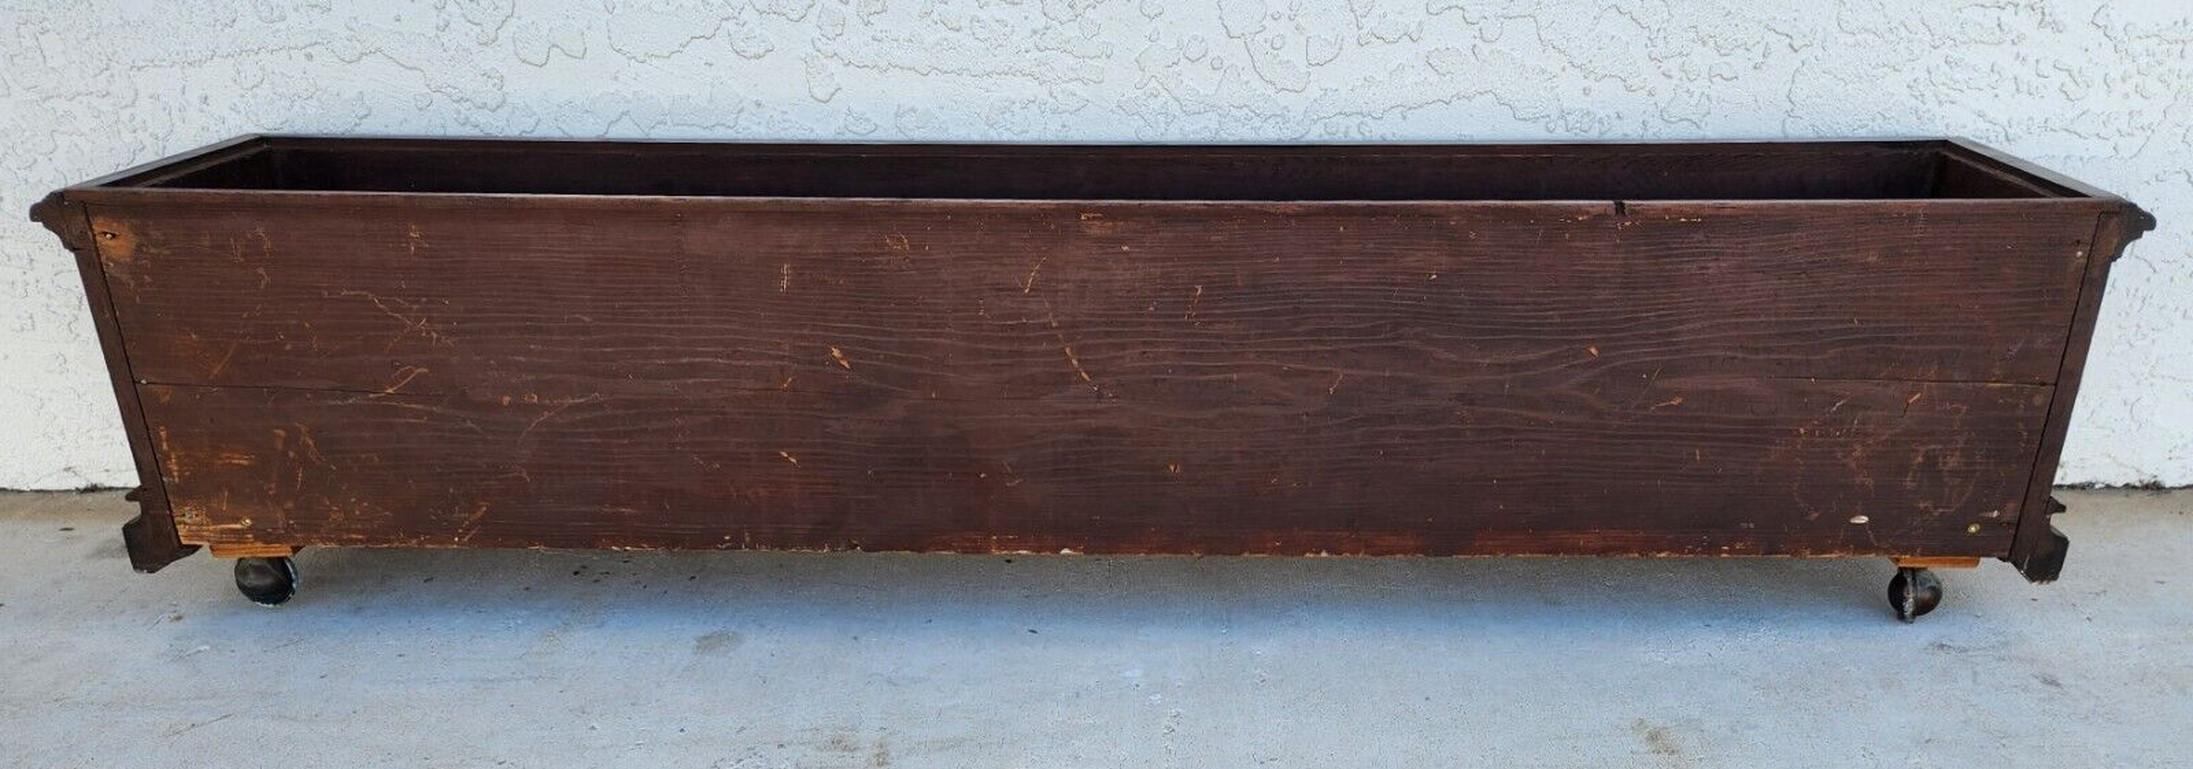 Antique English Tile & Mahogany Planter Rolling 1930's For Sale 3